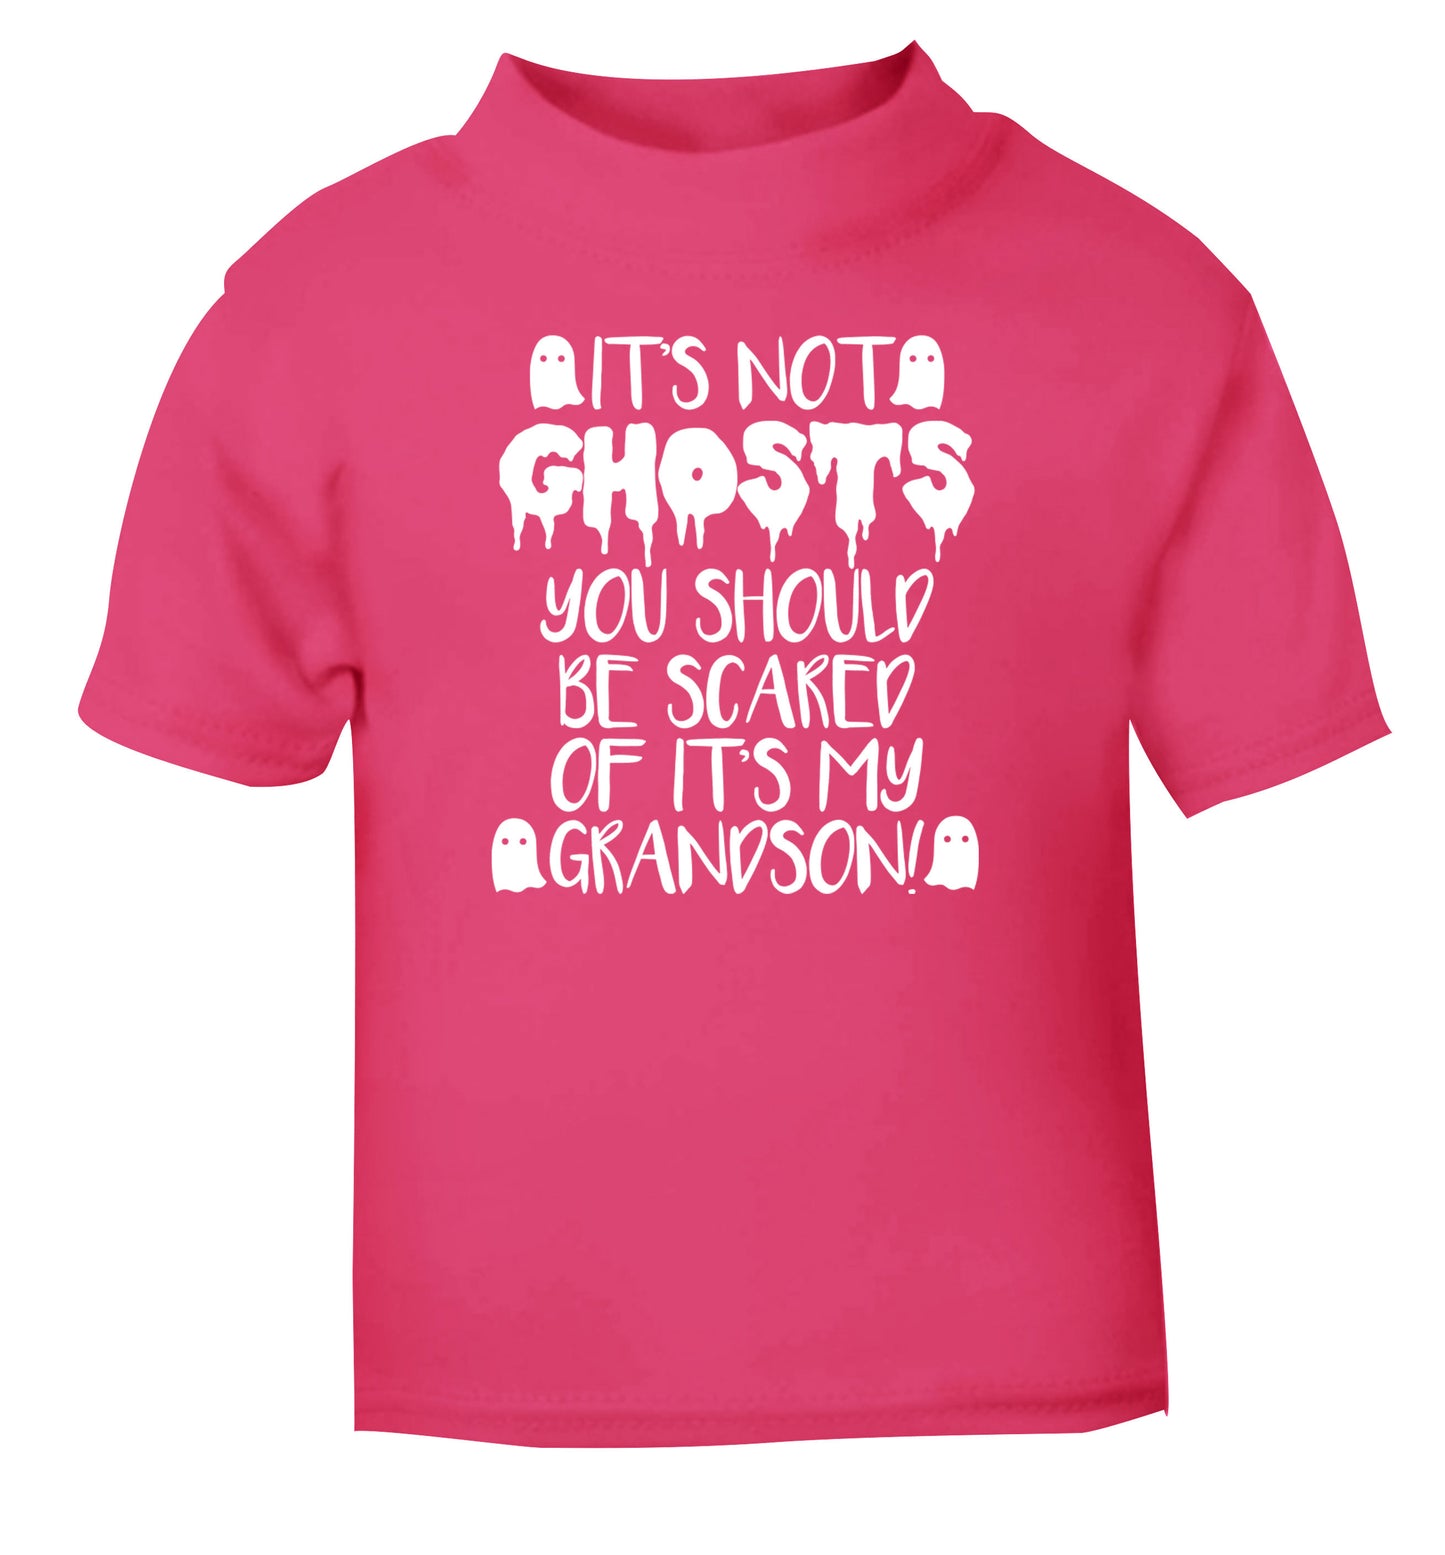 It's not ghosts you should be scared of it's my grandson! pink Baby Toddler Tshirt 2 Years